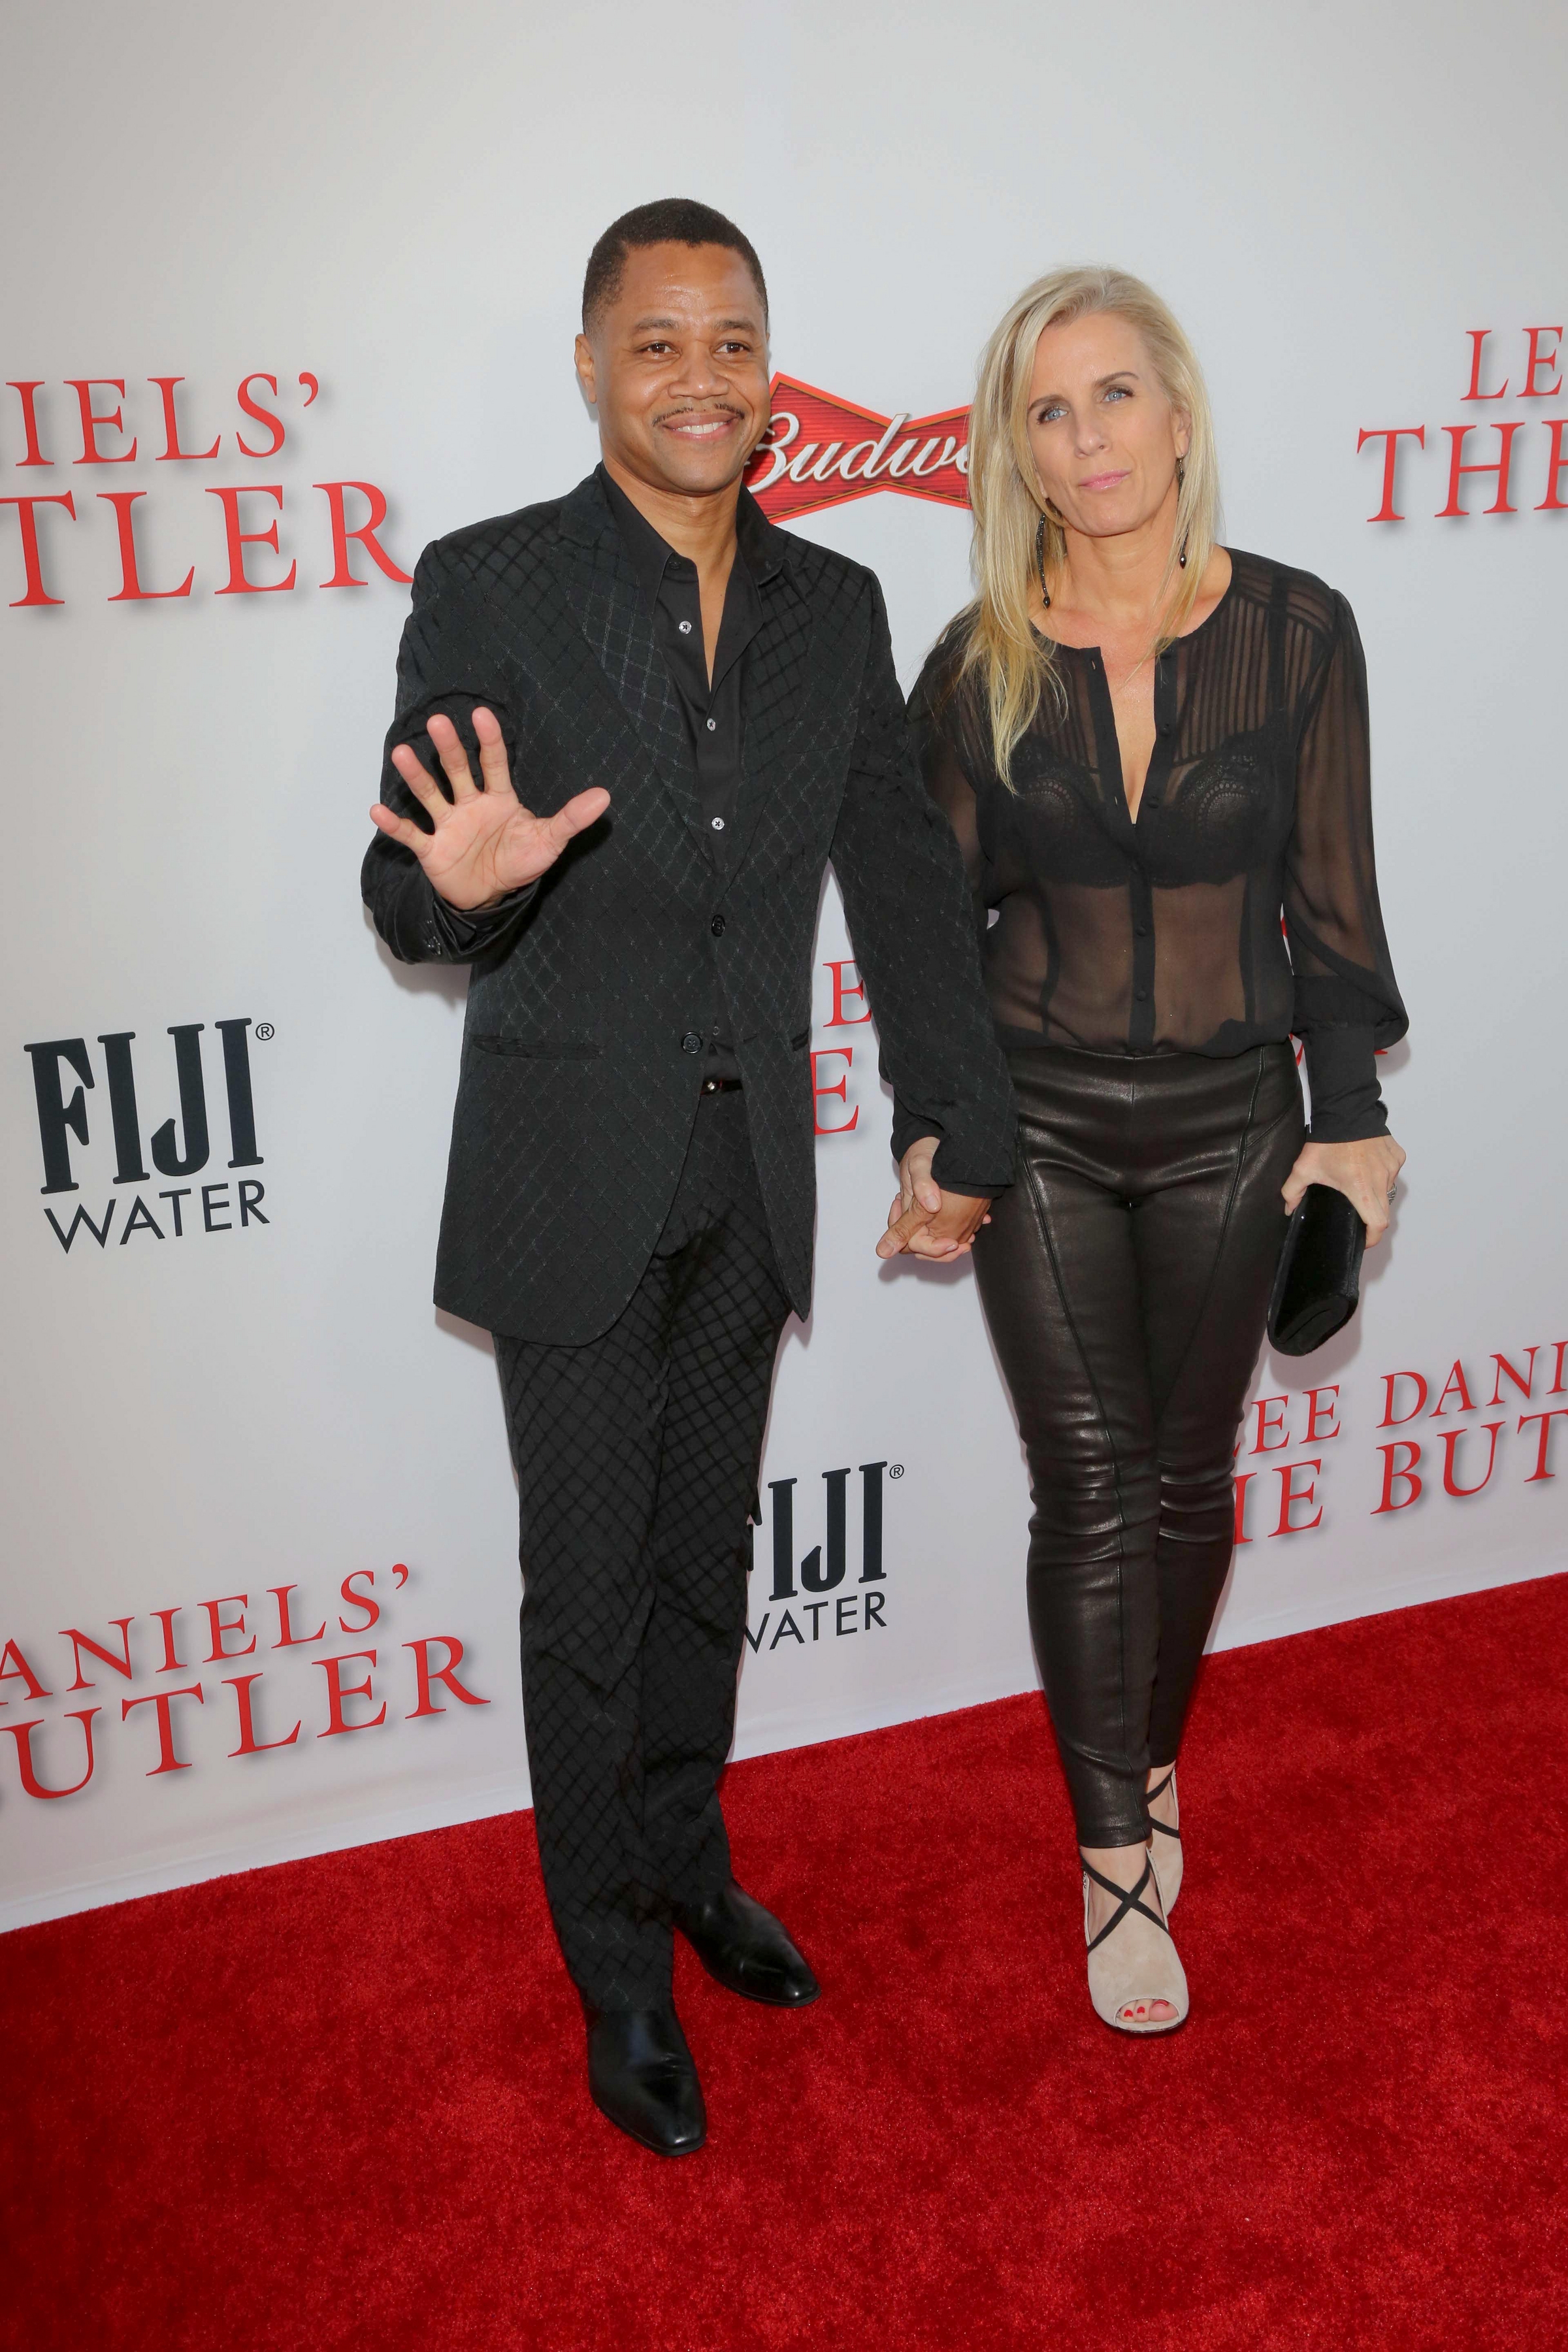 08/12/2013 - Cuba Gooding Jr. and wife Sara Kapfer - "The Butler" Los Angeles Premiere - Arrivals - Regal Cinemas L.A. Live - Los Angeles, CA, USA - Keywords: LEE DANIELS' "THE BUTLER" Los Angeles Premiere red carpet Arrivals, Hosted by TWC, Budweiser, FIJI Water, Purity Vodka, Stack Wines Orientation: Portrait Face Count: 1 - False - Photo Credit: Andrew Evans / PR Photos - Contact (1-866-551-7827) - Portrait Face Count: 1